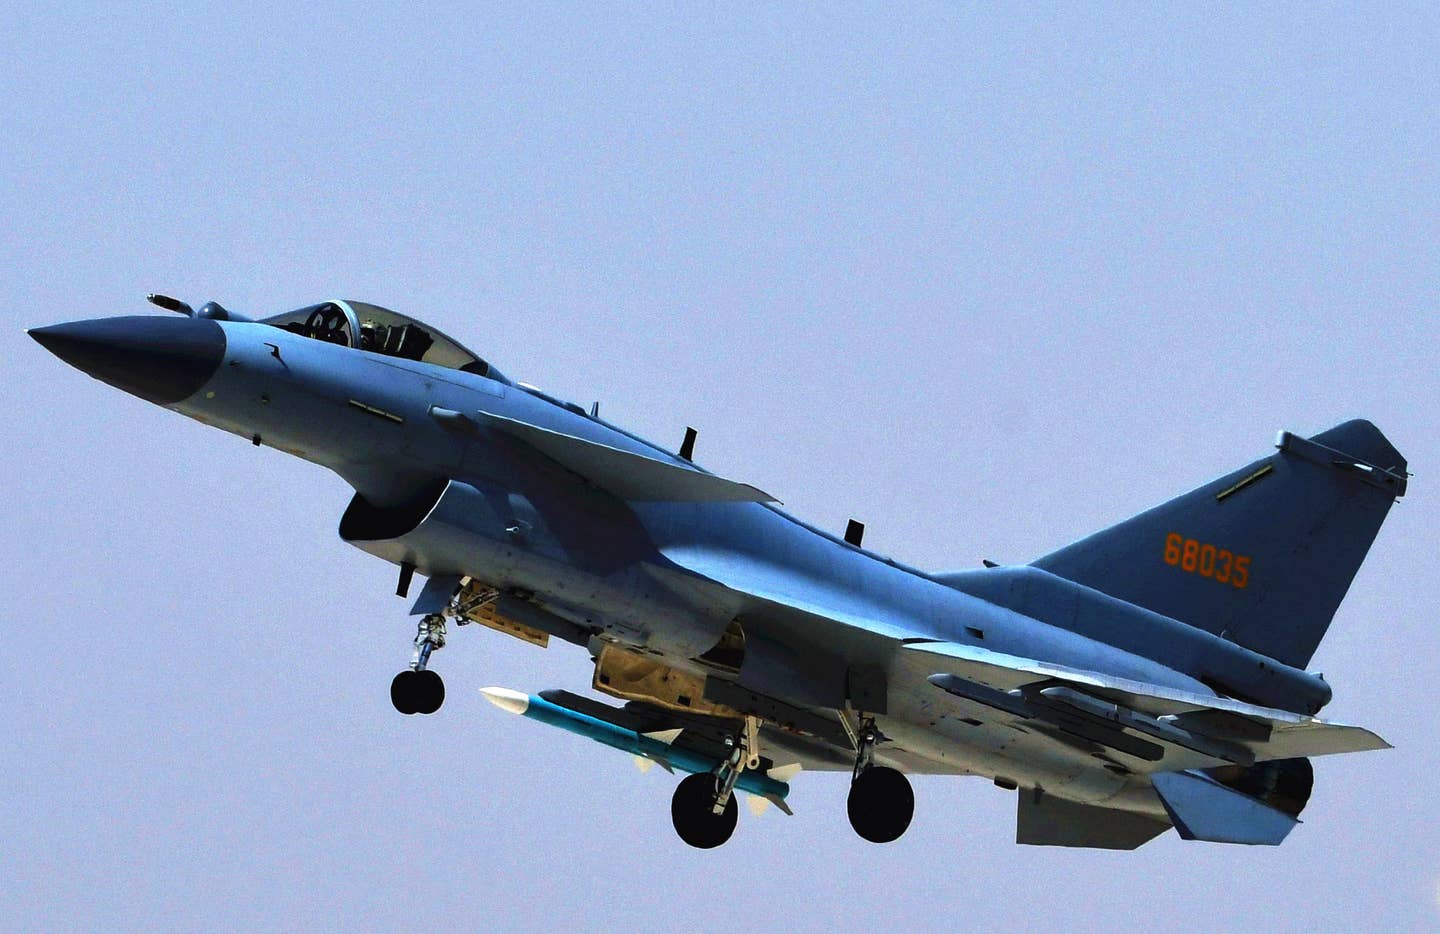 A PLAAF J-10C conducts a training sortie, with a single inert PL-12 round carried under the starboard wing. <em>Xinhua/Liu Chuan via Getty Images</em>